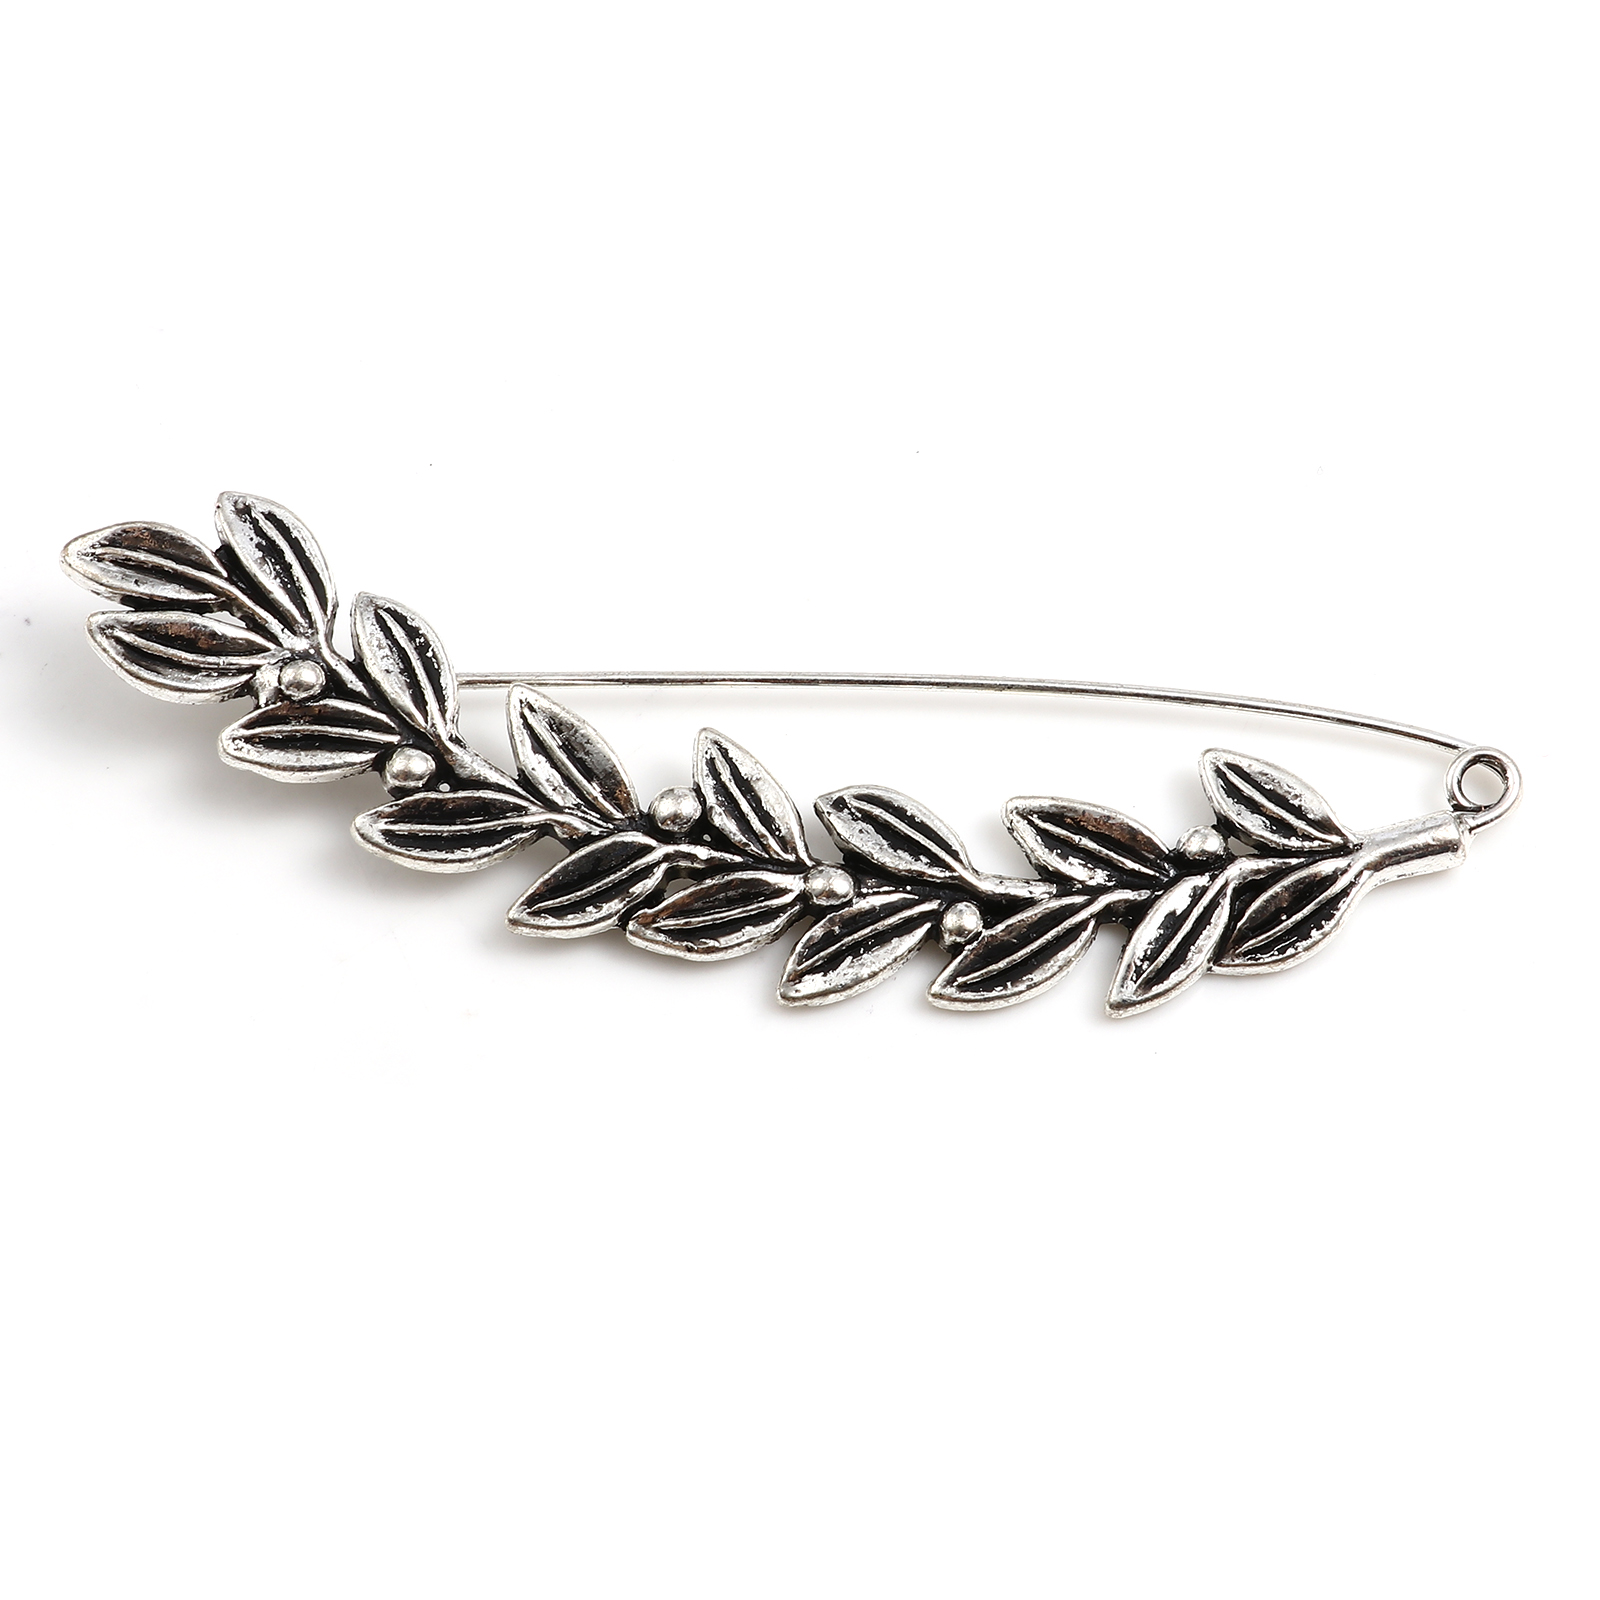 Picture of Zinc Based Alloy Pin Brooches Findings Ear Of Wheat Antique Silver Color 8.6cm x 3.2cm, 2 PCs